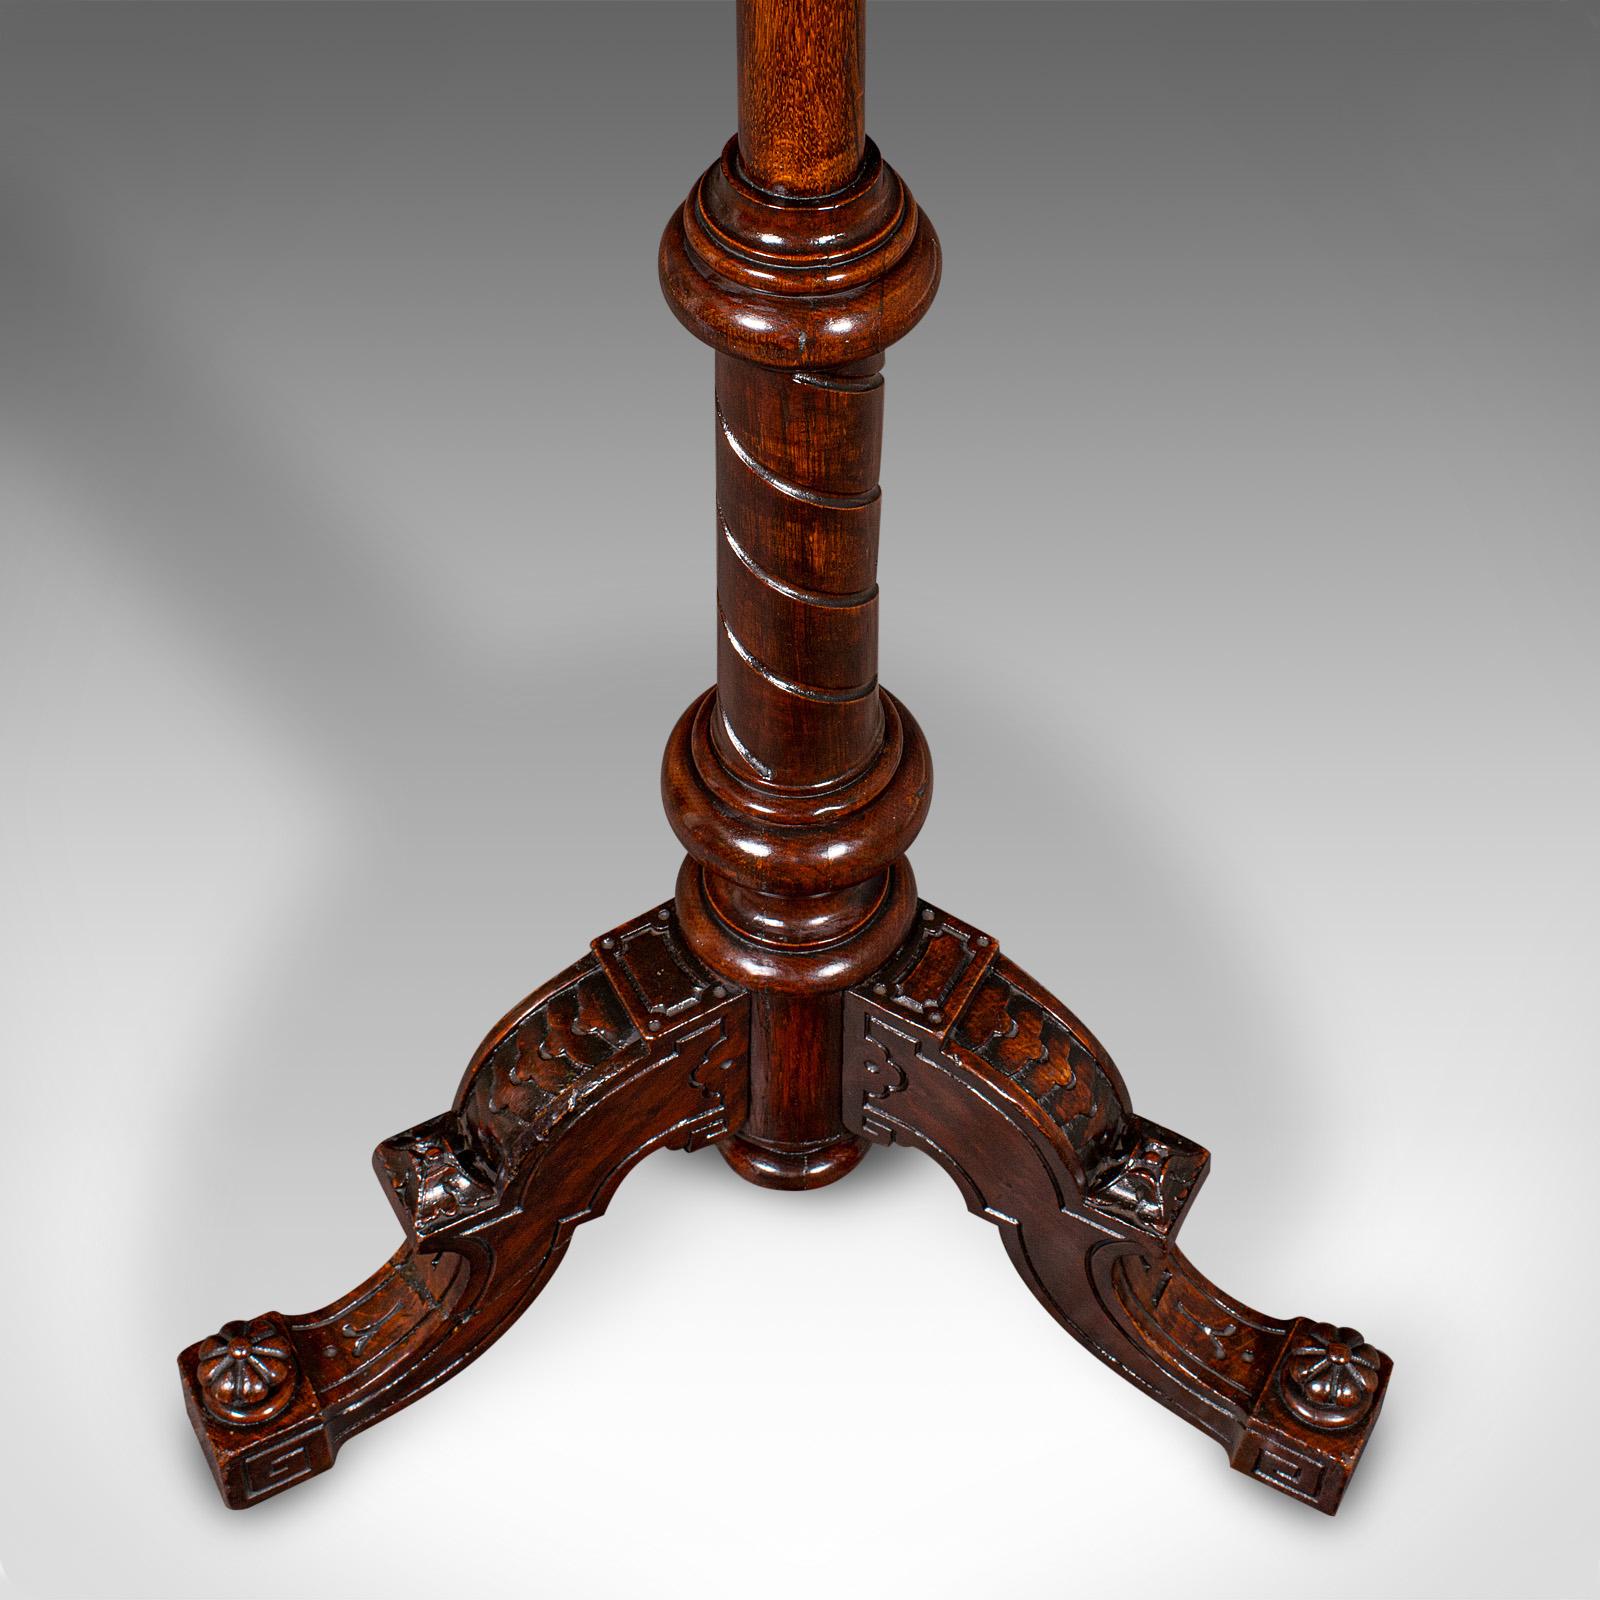 Tall Antique Music Stand, English, Oak, Adjustable Recital Rest, Victorian, 1880 For Sale 6